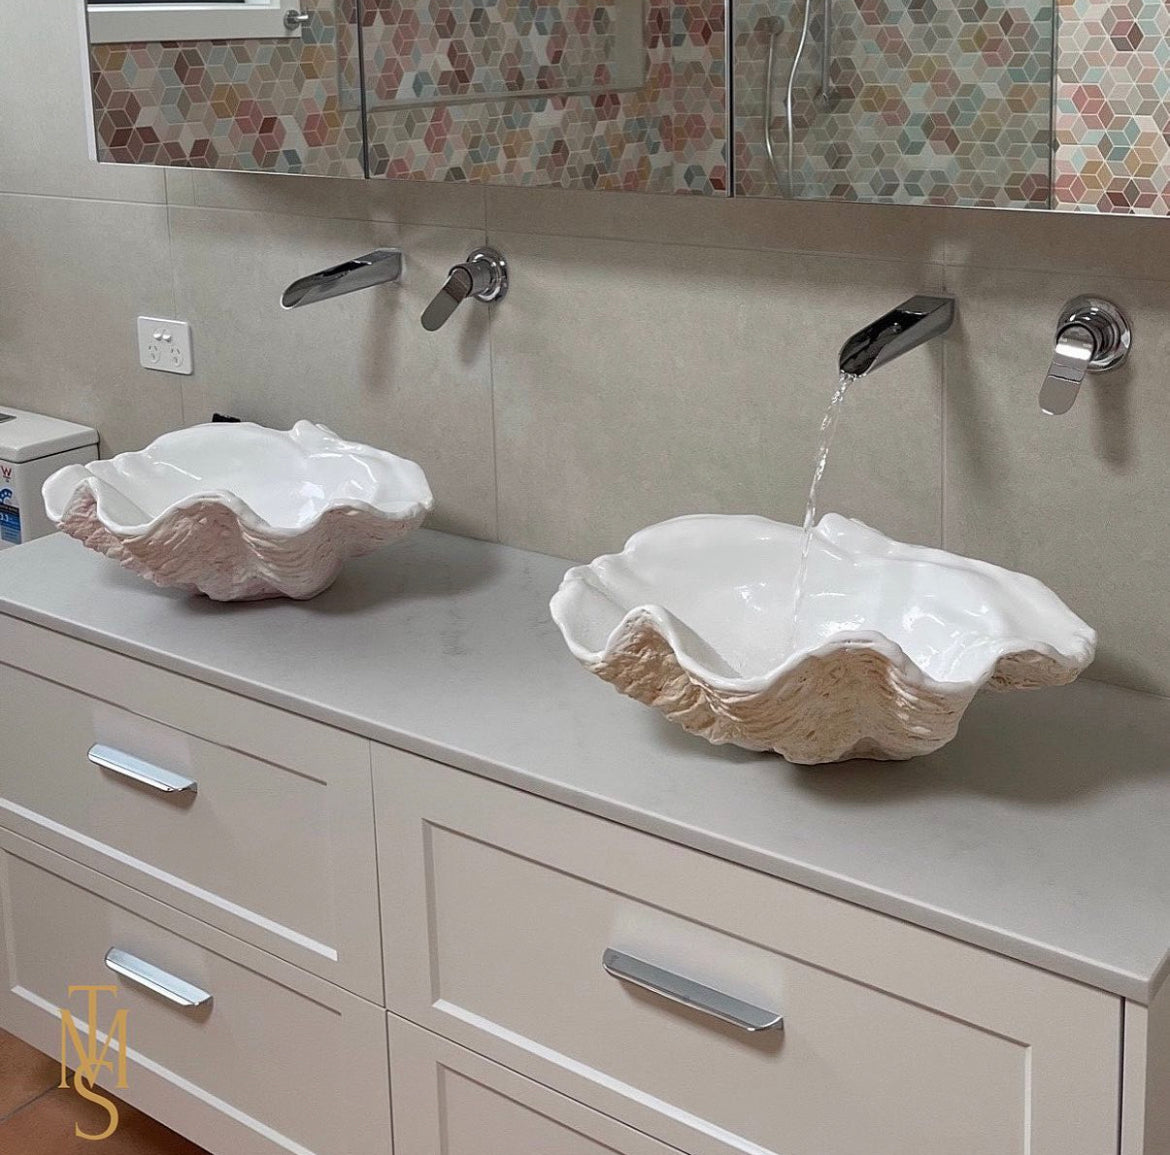 2 small clam shell sinks